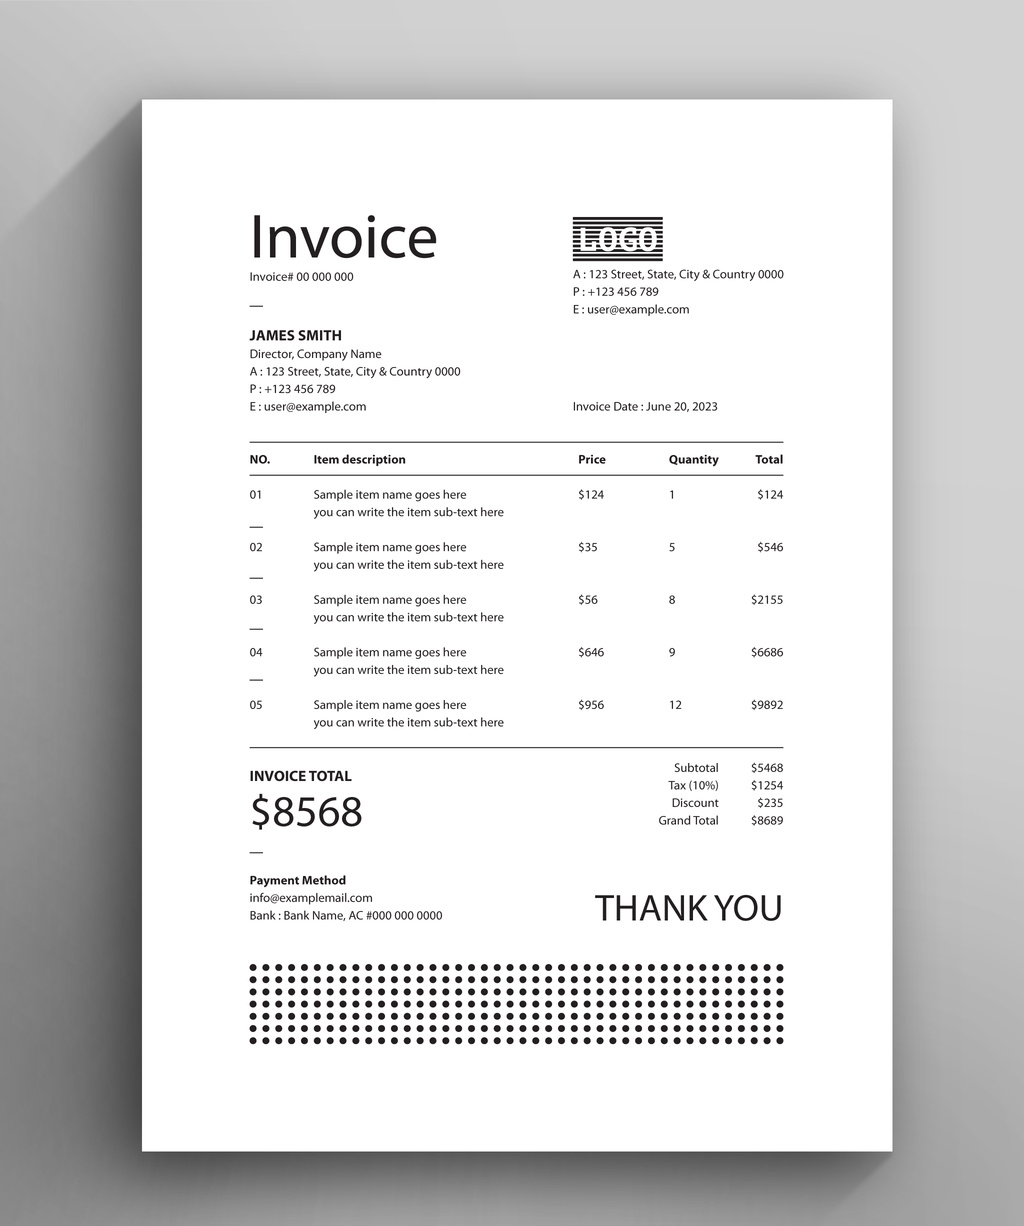 Simple Invoice Black and White Template (AI Format)